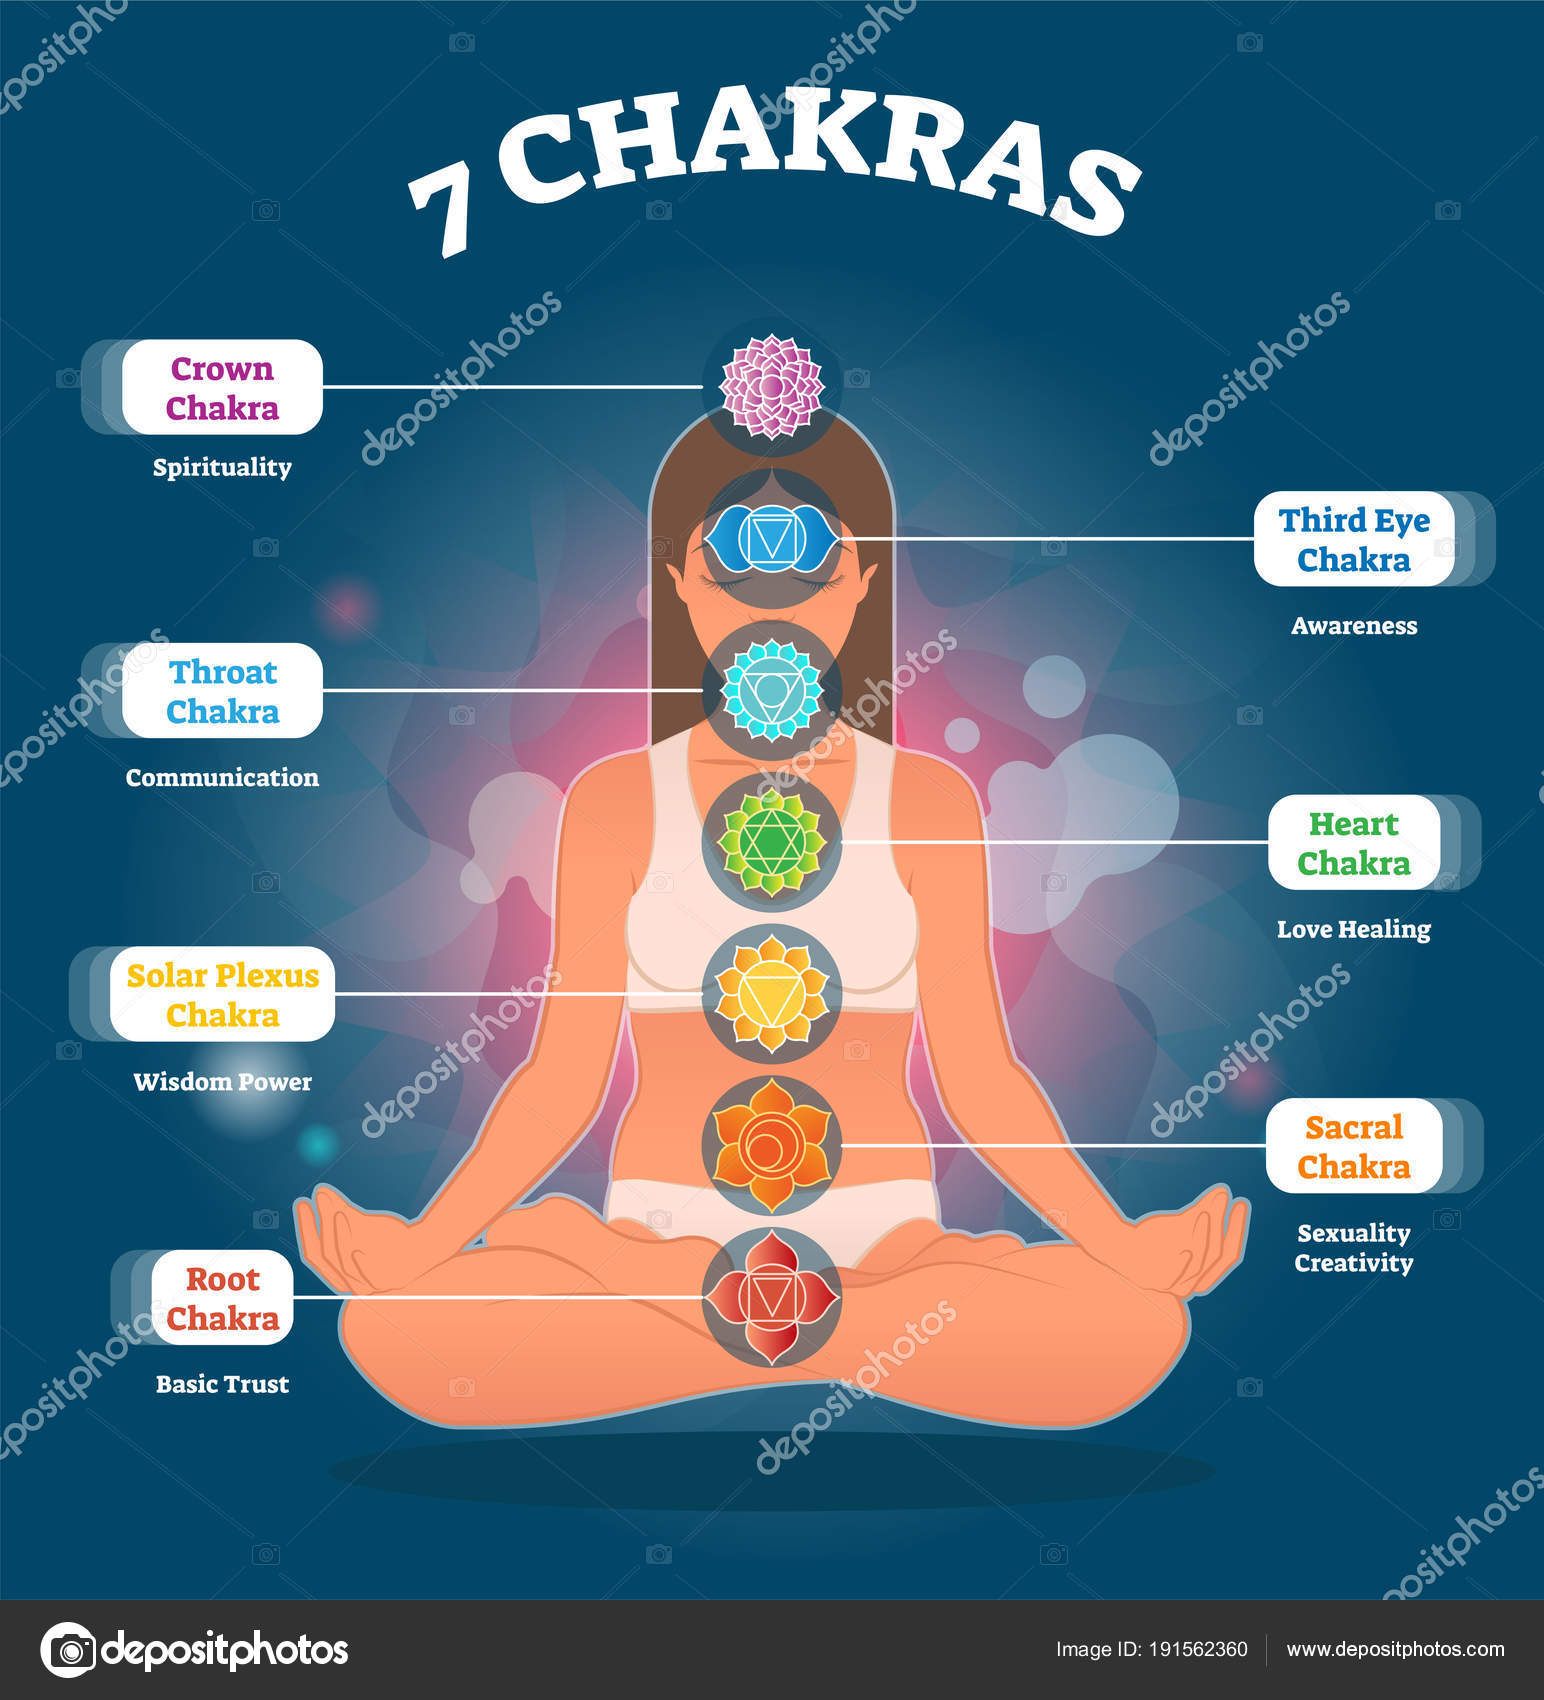 7 Chakra meanings and symbols, vector illustration diagram with woman in  lotus pose. Stock Illustration by ©VectorMine #191562360